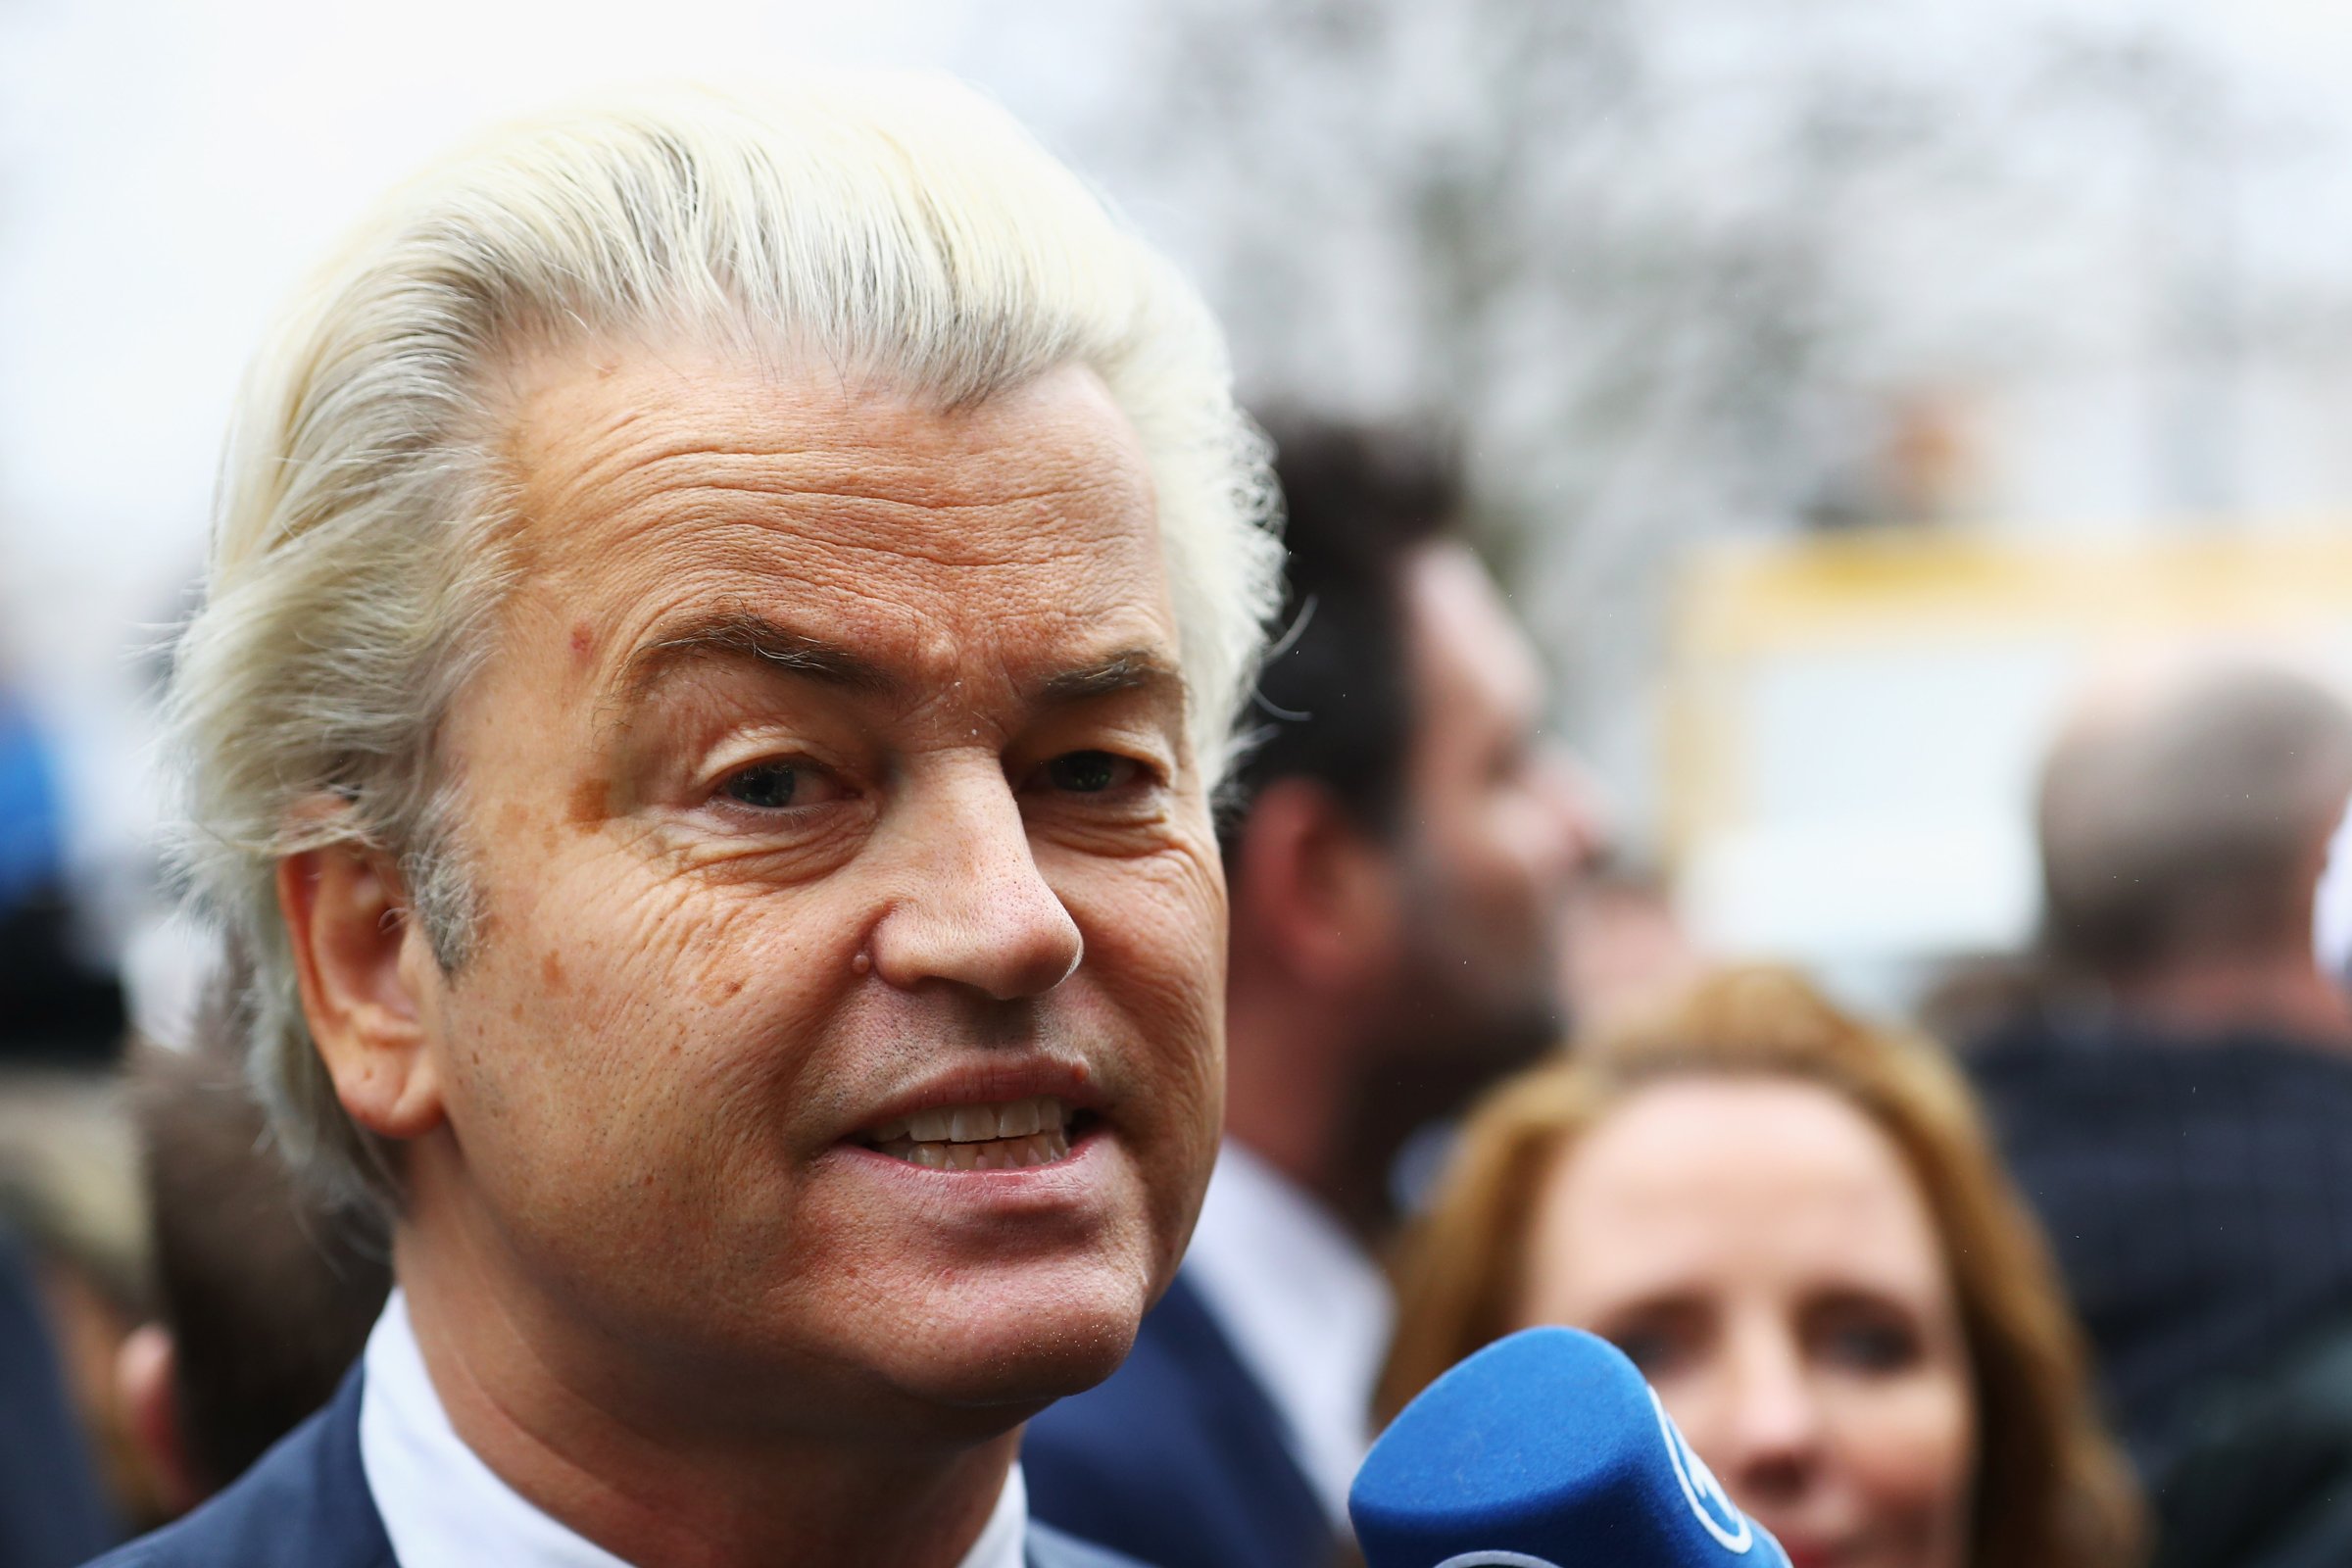 PVV Candidate, Geert Wilders speaks to the crowd, the media and shakes hands with supporters as he kicks off his election campaign near the Dorpskerk on February 18, 2017 in Spijkenisse, Netherlands.